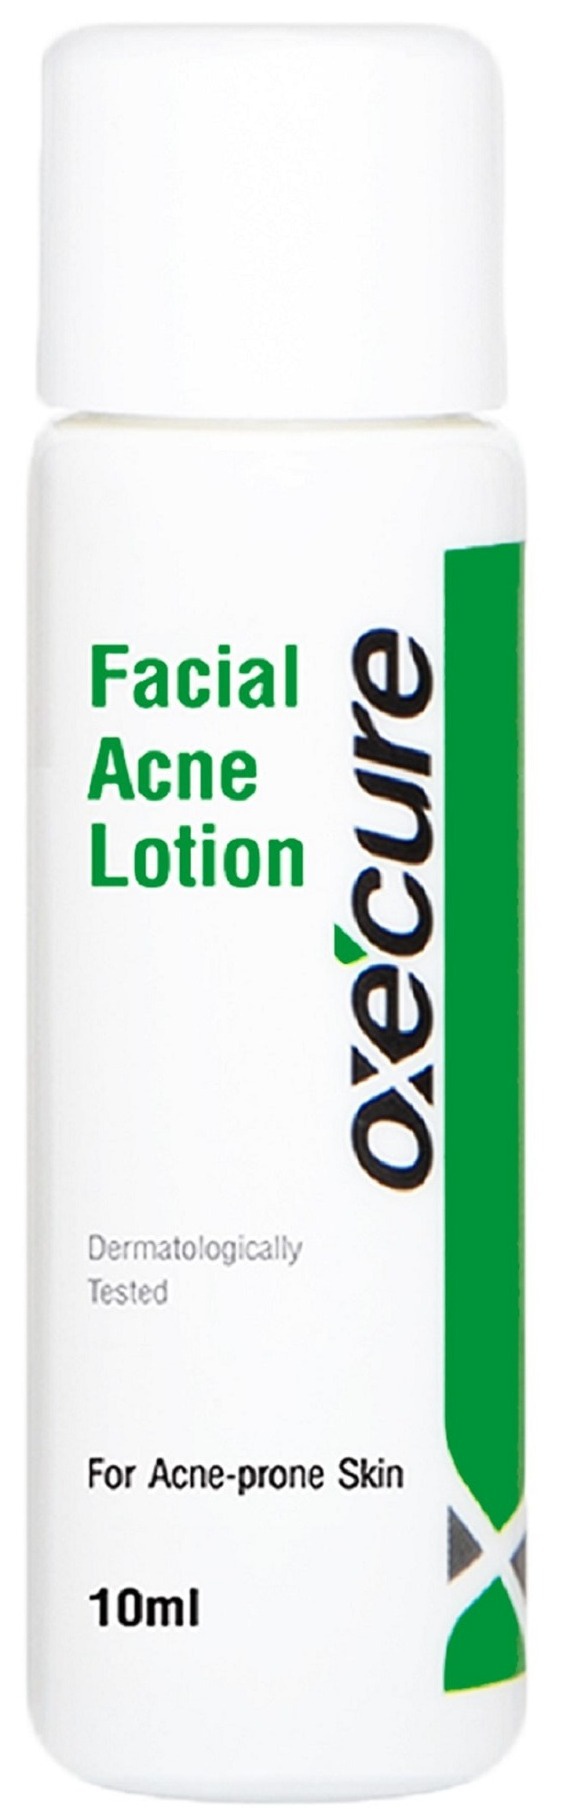 Oxecure Facial Acne Lotion